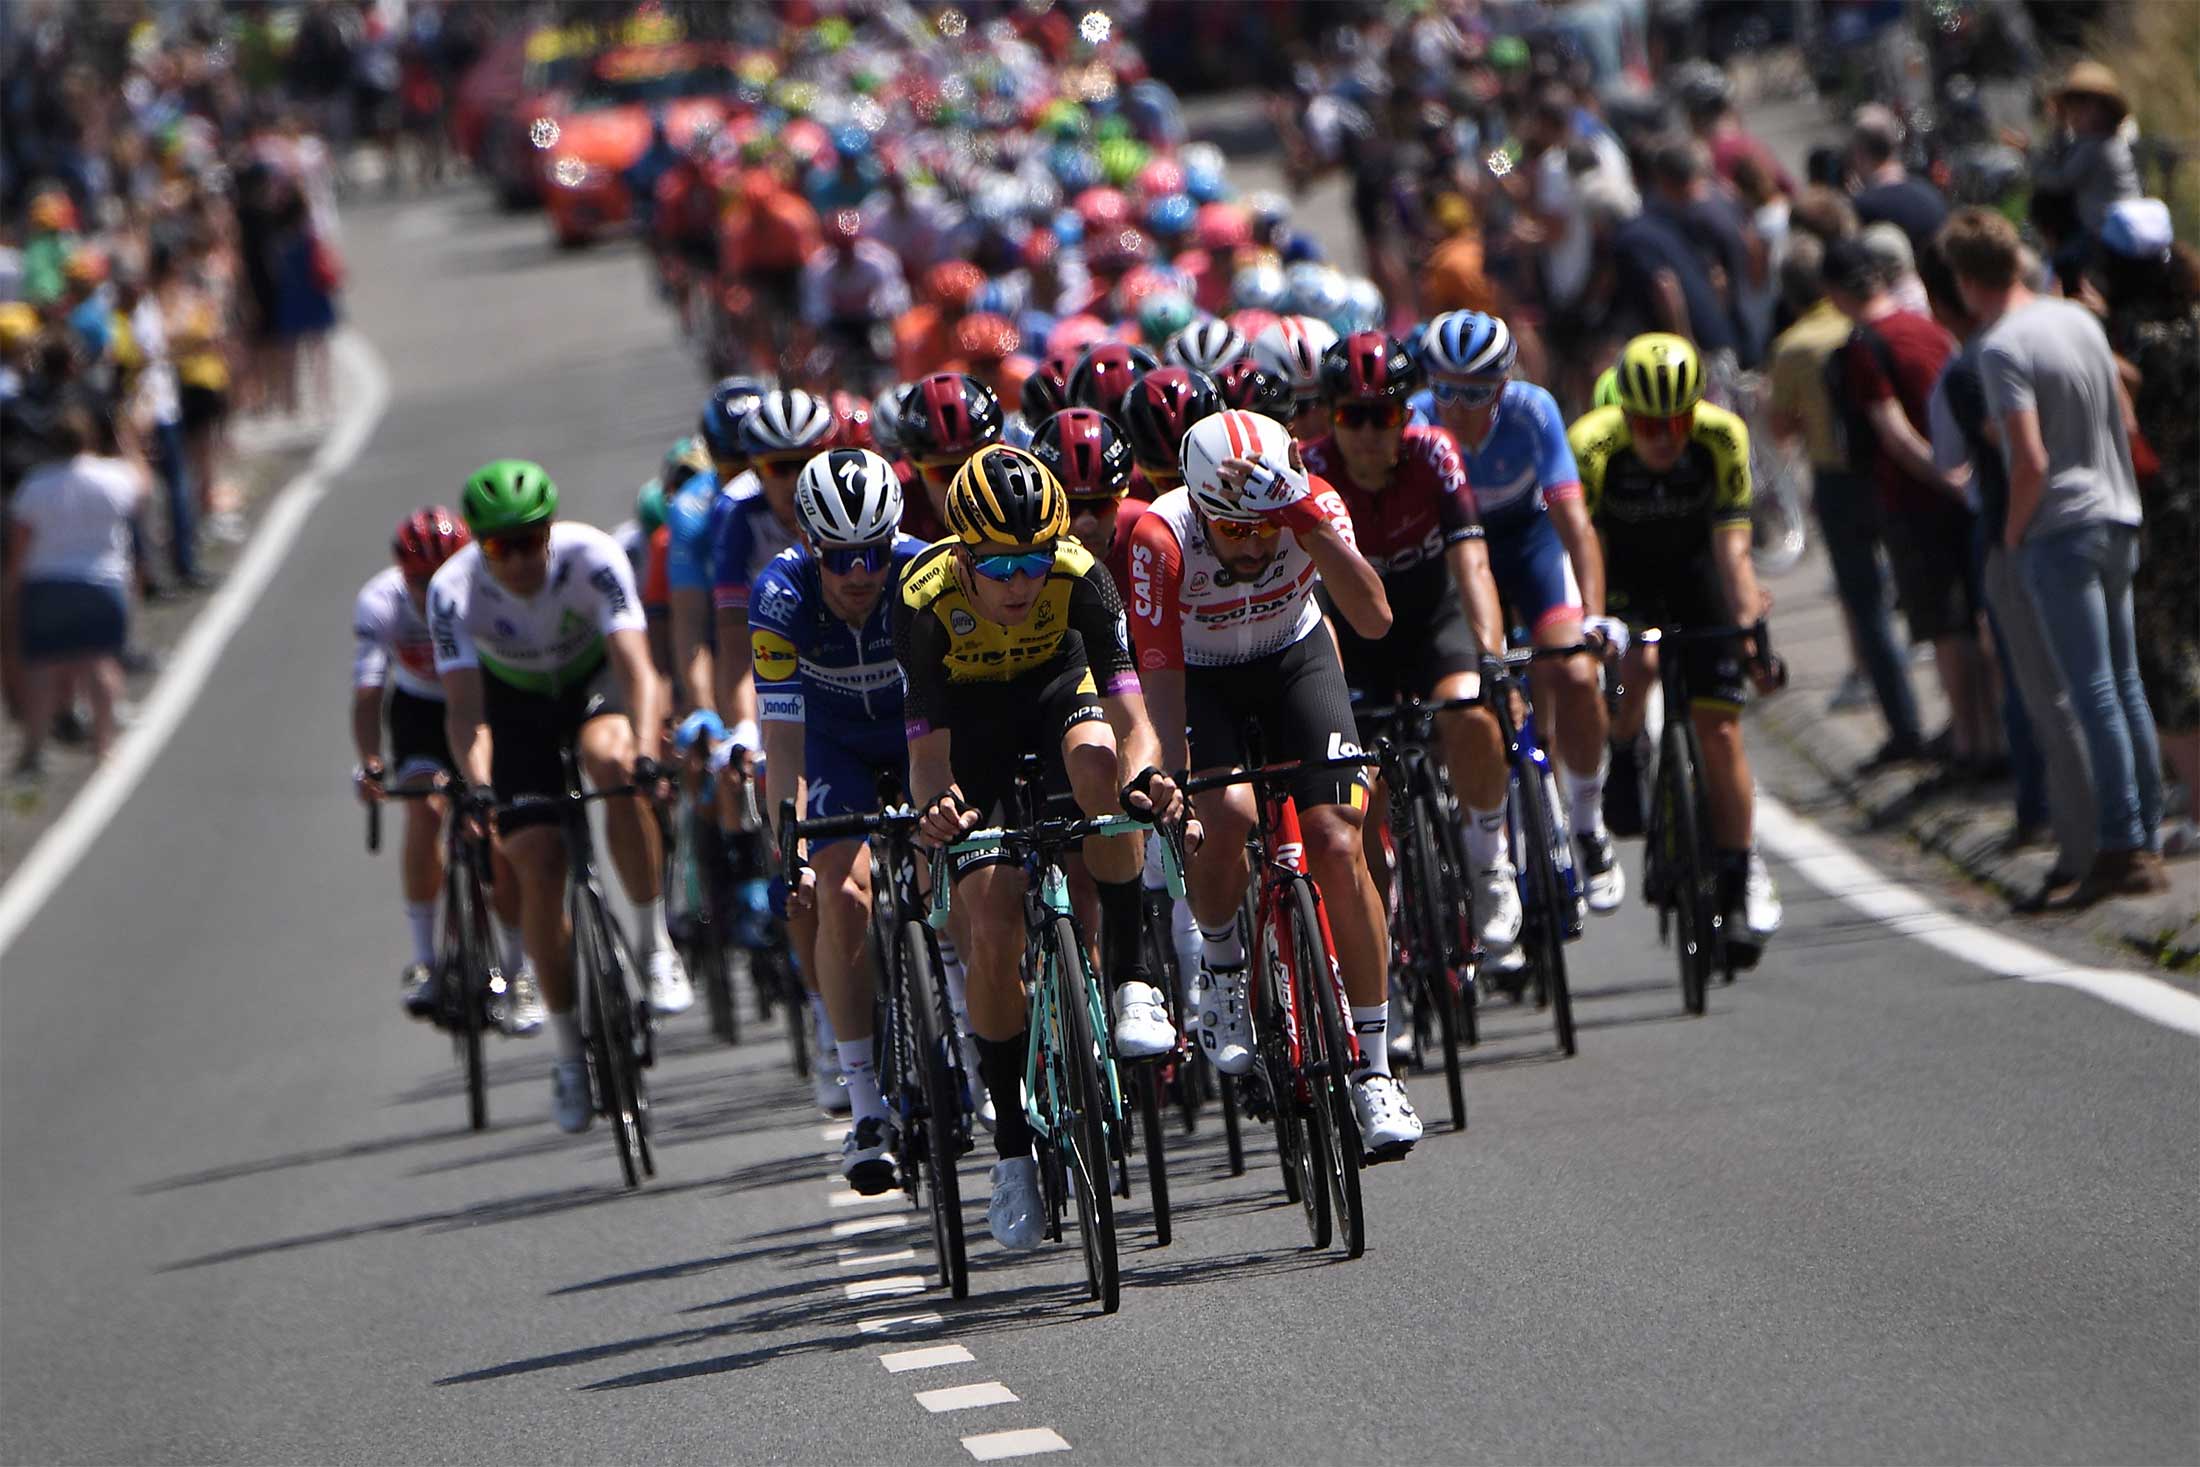 The peleton on July 6 during&nbsp;the first stage of the&nbsp;Tour de France.&nbsp;